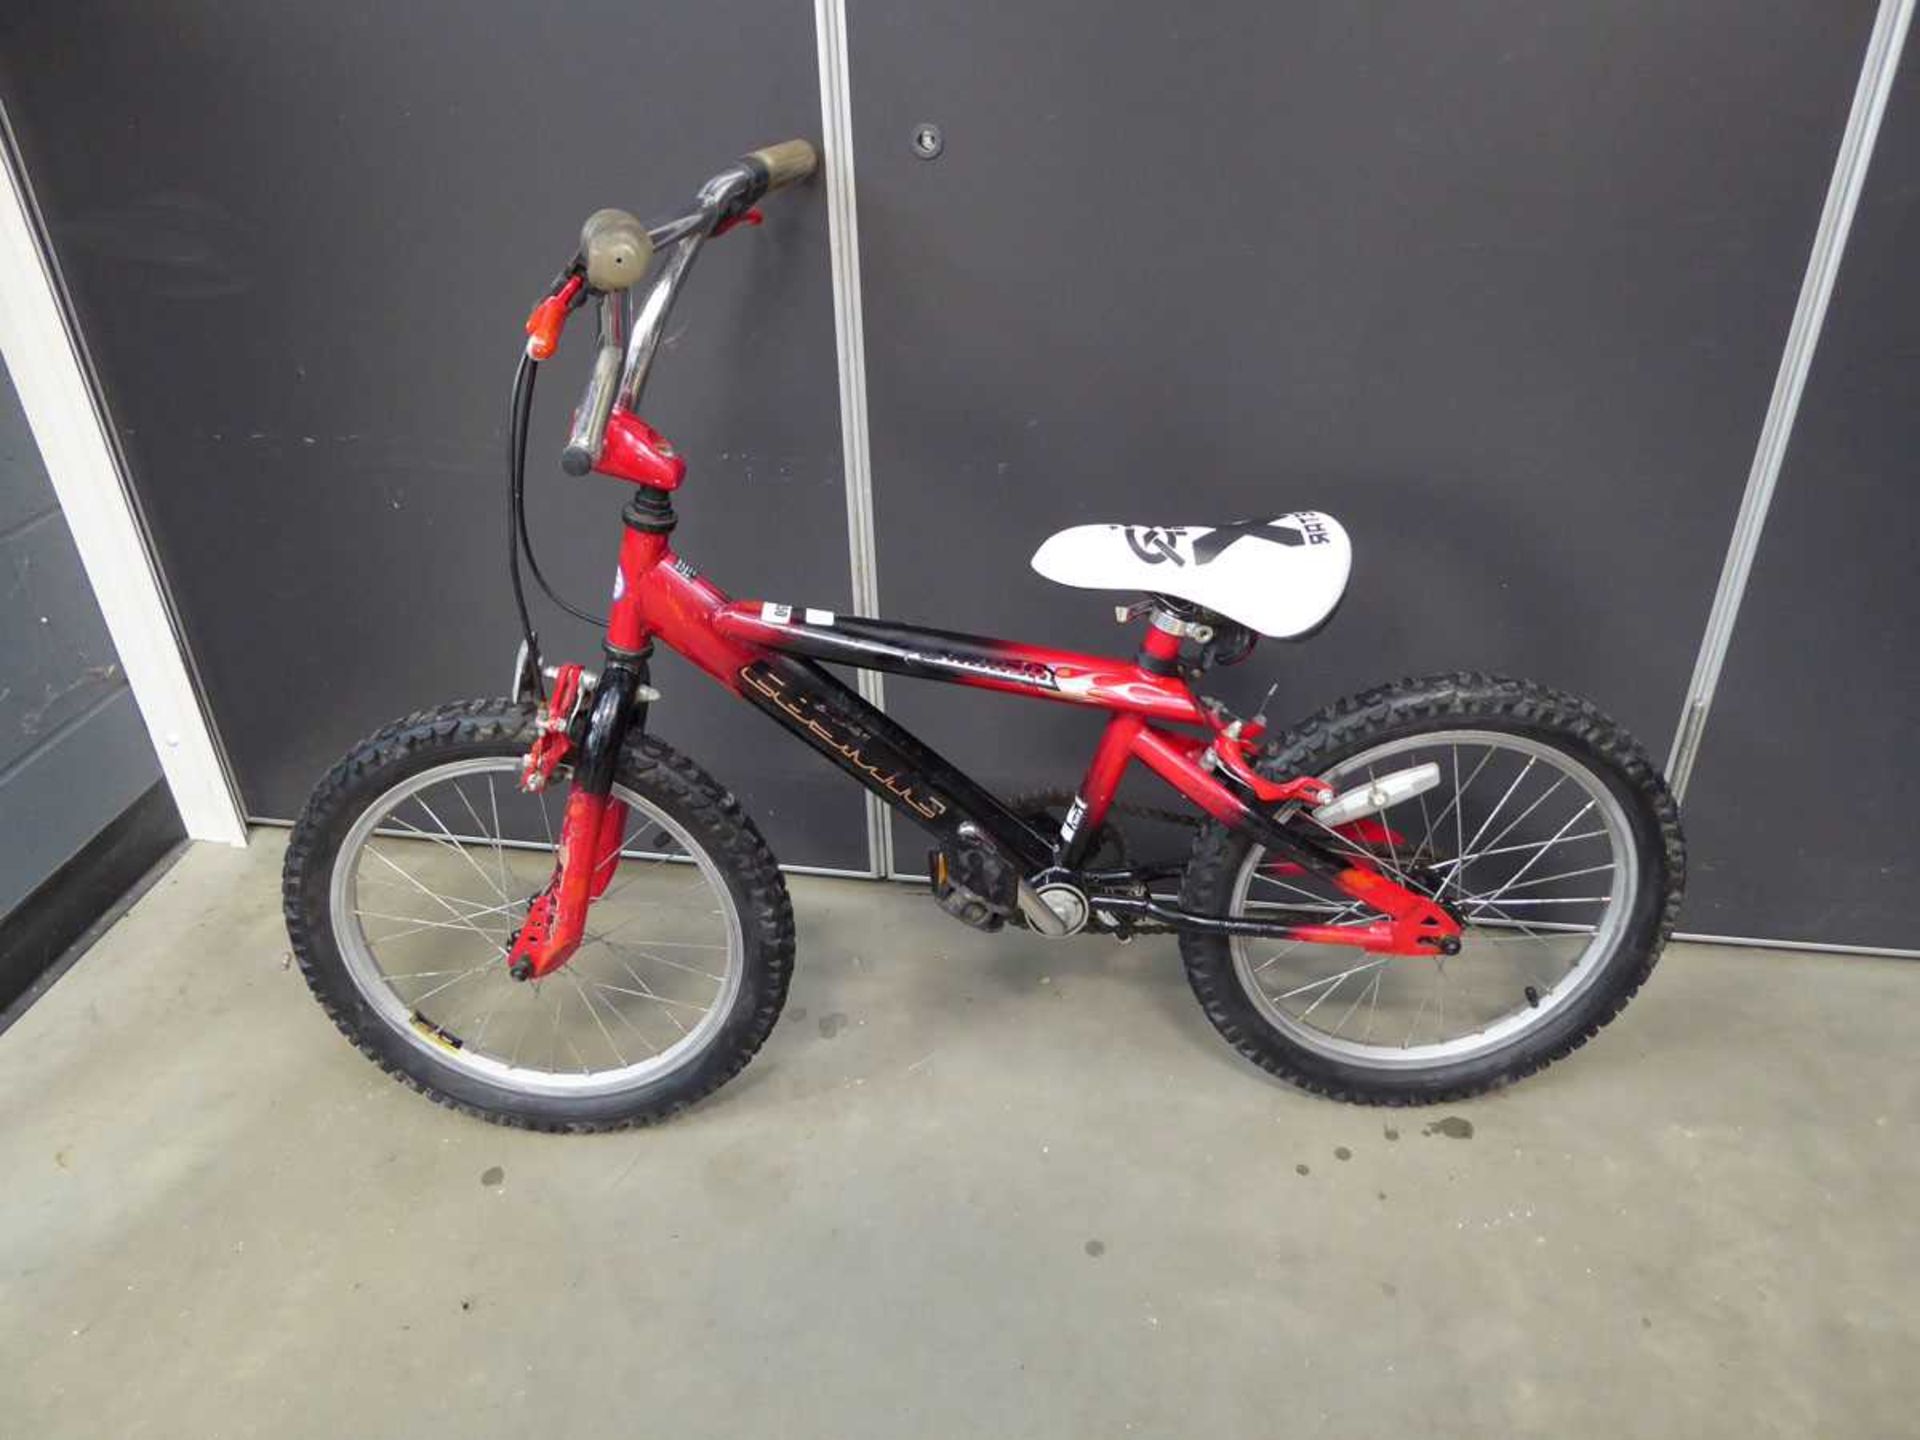 +VAT Child's BMX bike in red and black - Image 2 of 2